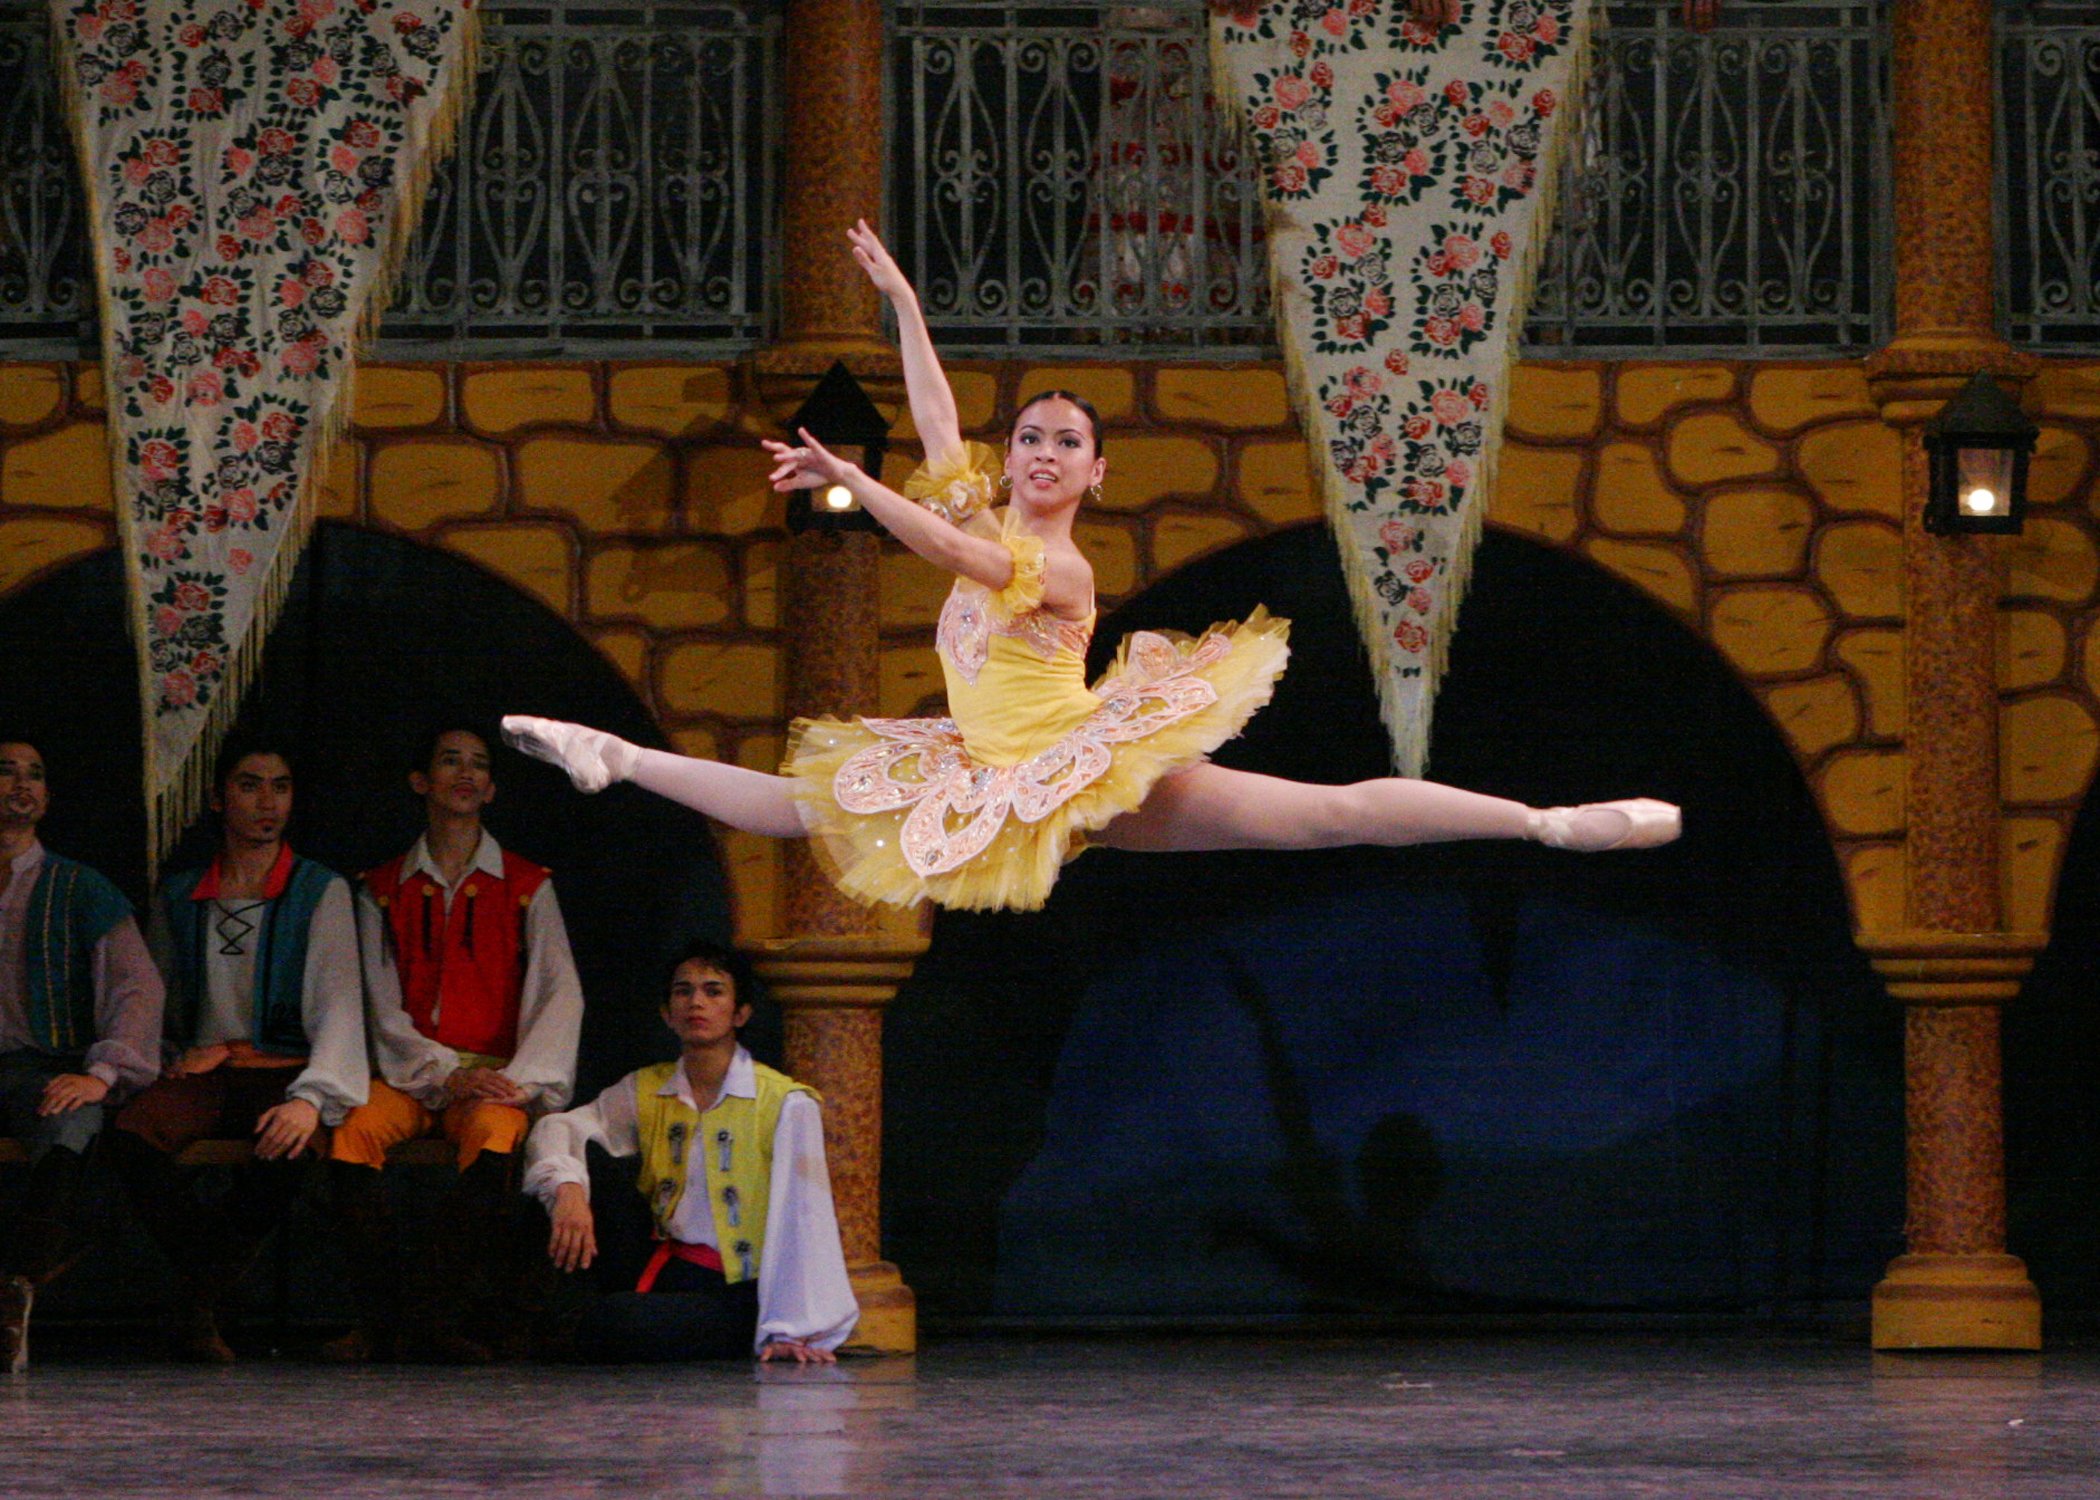   Don Quixote  is renowned for vigorous dancing. In Ballet Manila’s 2006 staging, Sofia Sangco-Peralta – as one of Kitri’s bridesmaids – gets in the spirit of things as she makes a joyous leap in a yellow tutu at her friend’s wedding to Basilio. Phot